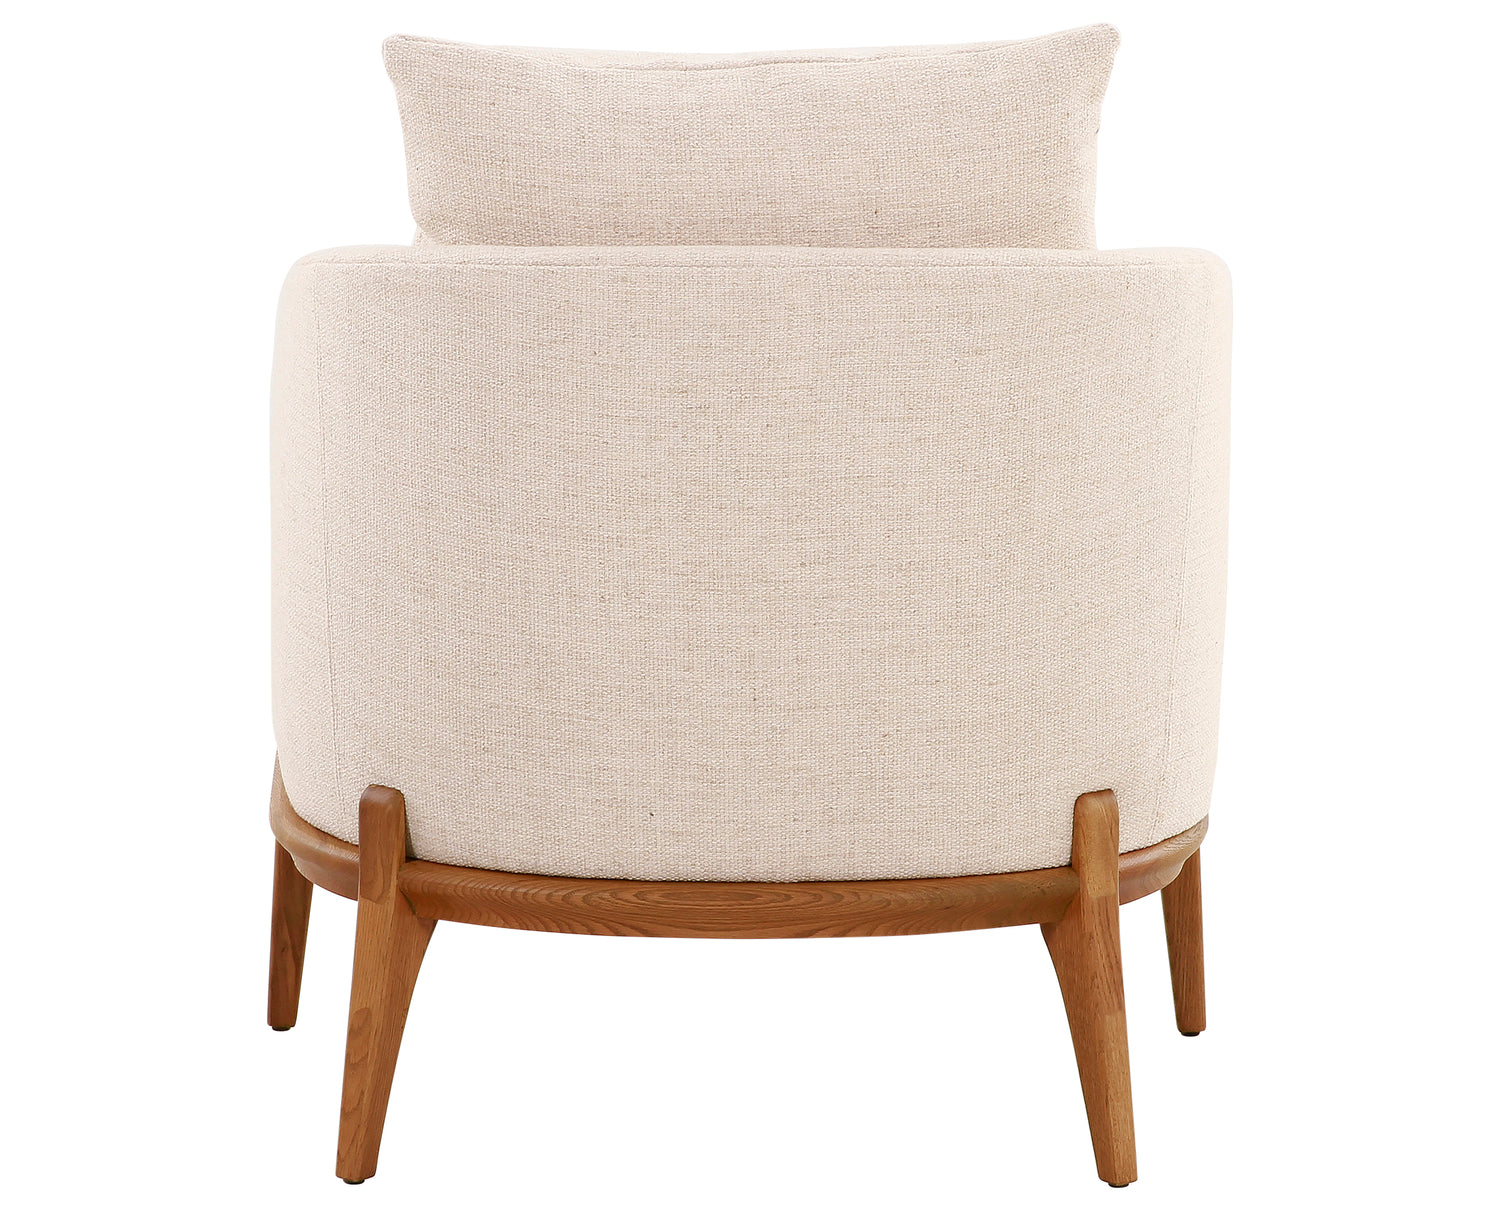 Thames Cream Fabric with Toasted Oak | Copeland Chair | Valley Ridge Furniture